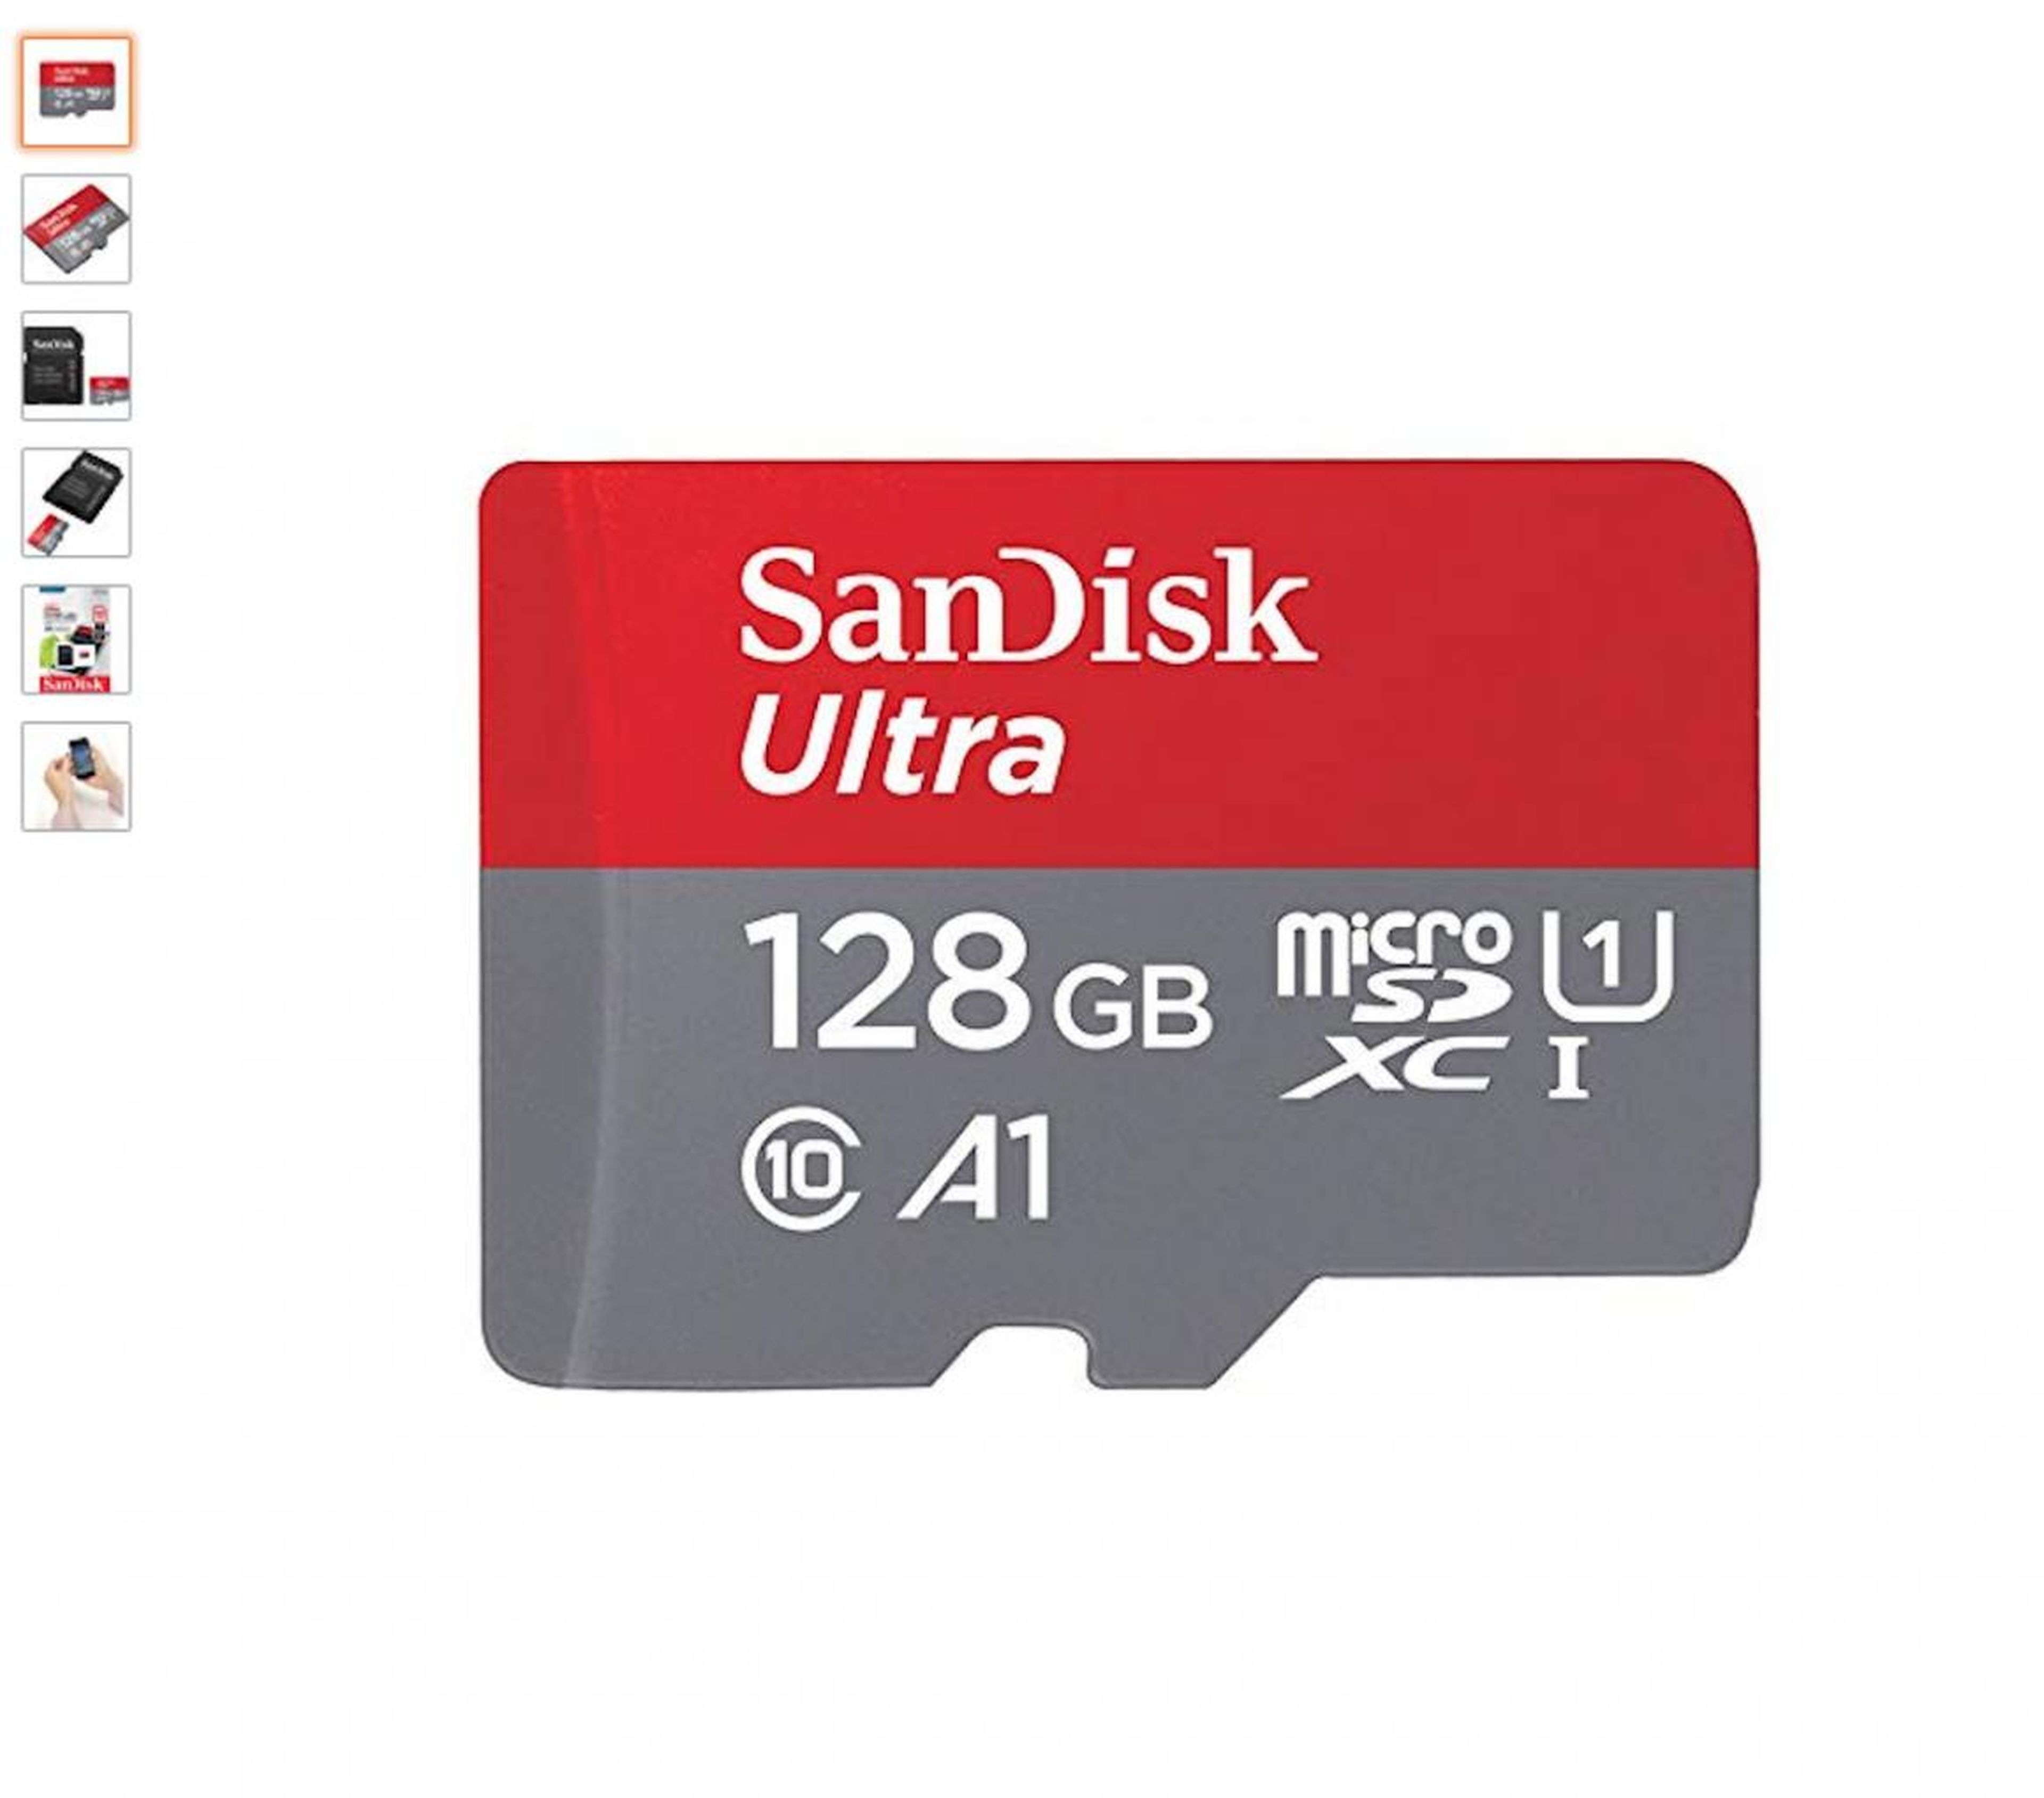 Belgium: A lot of shoppers in Belgium were buying <a href="https://amzn.to/2JwuVyQ">SanDisk Ultra 128GB memory cards</a>.